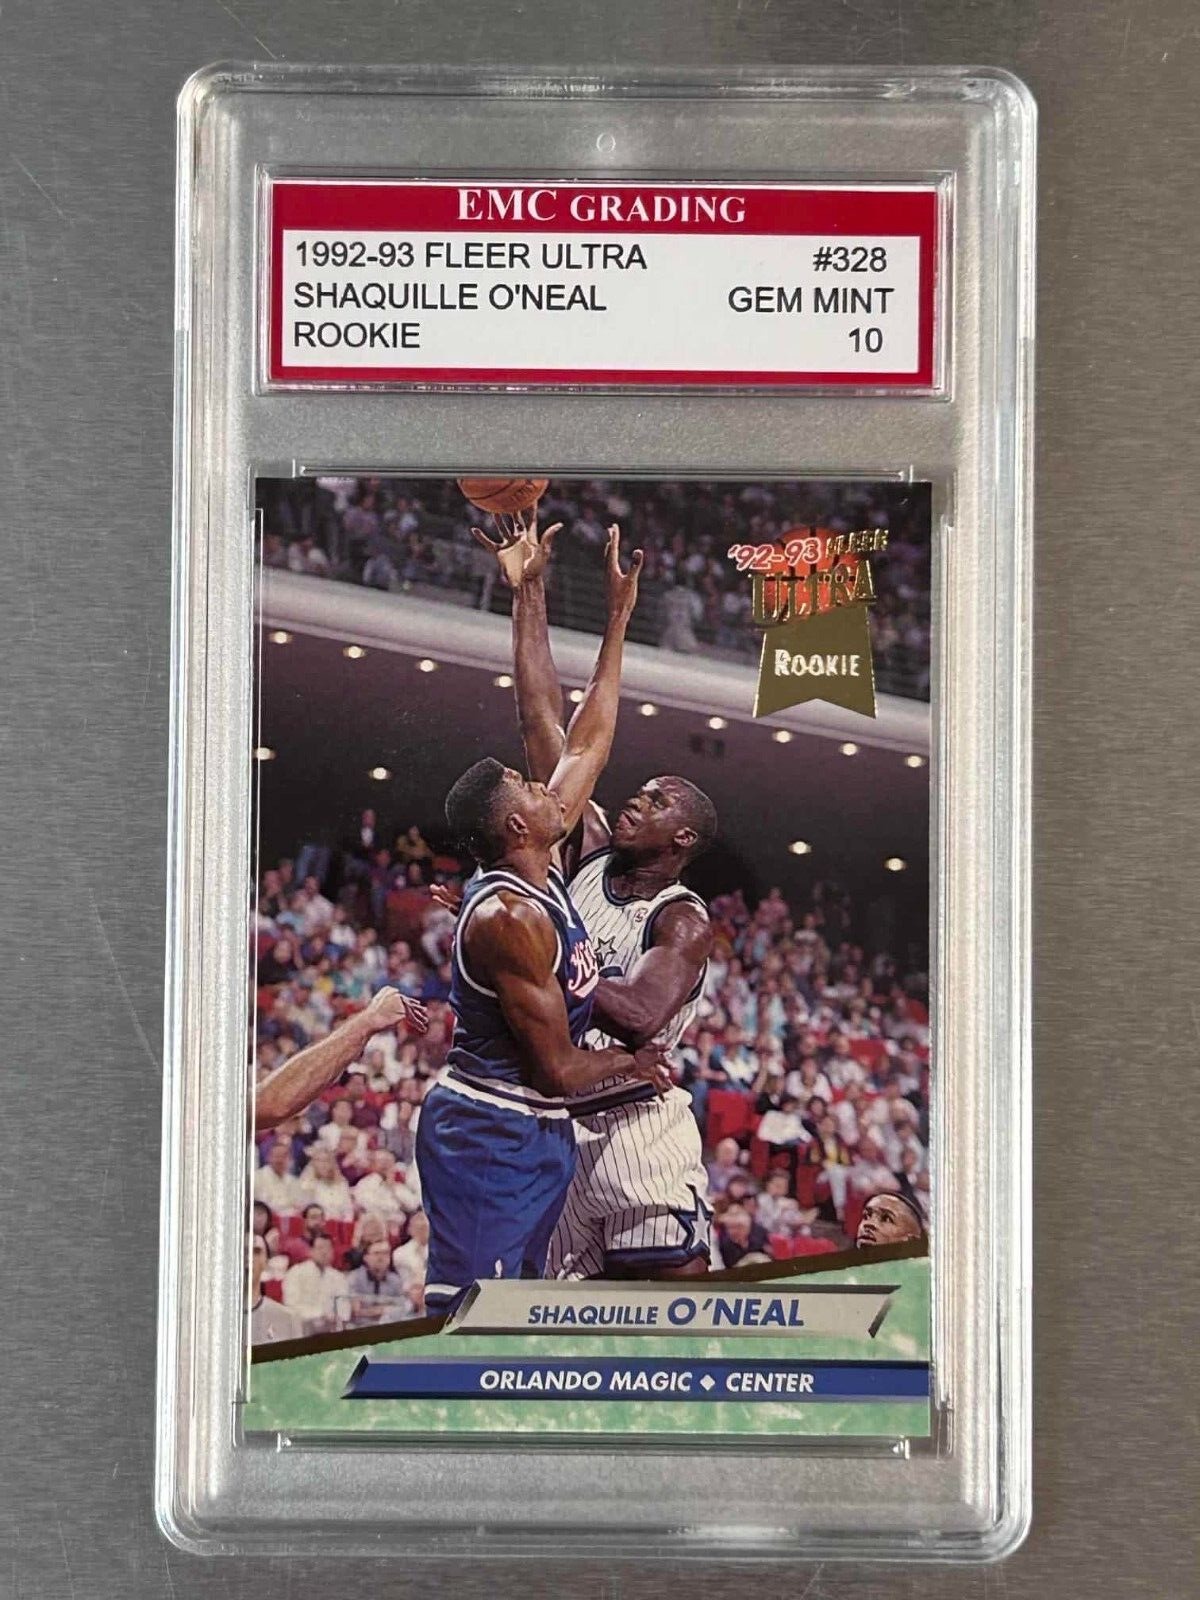 SHAQ SHAQUILLE O'NEAL 1992 ULTRA GRADED 10 RC ROOKIE BASKETBALL CARD #328